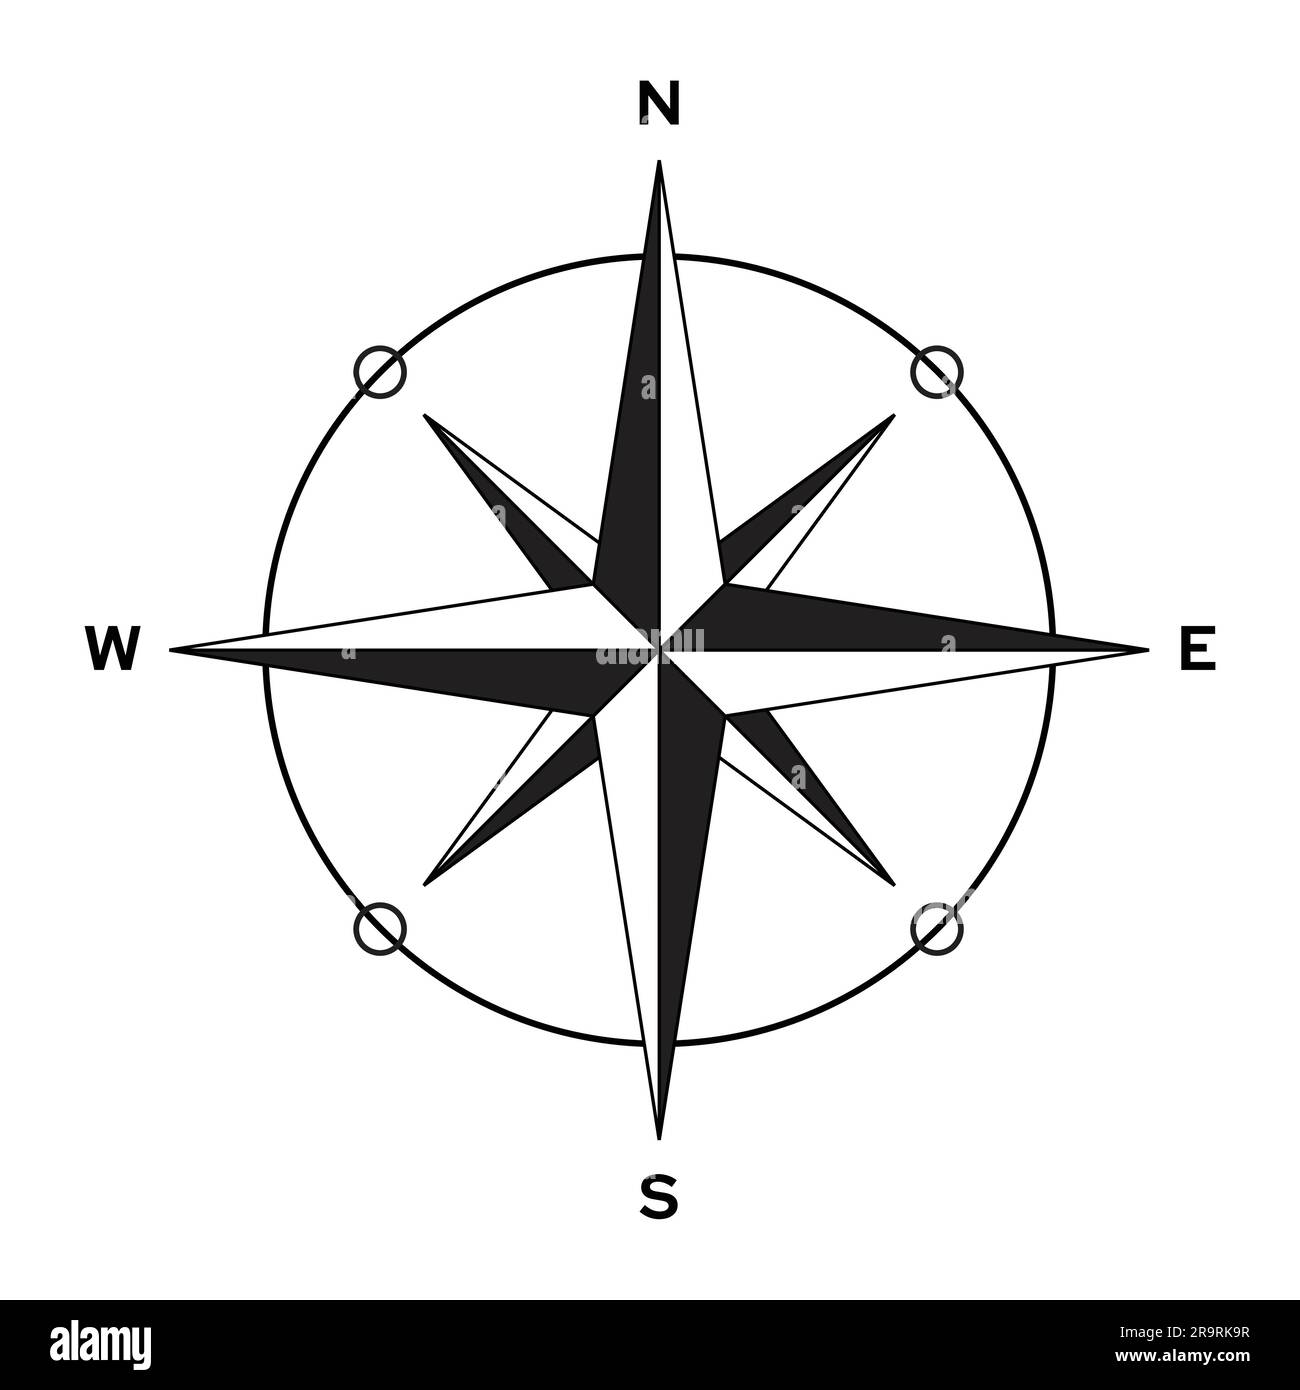 Compass Black on the white background, rose type North West East South Star wind shape symbol vector sign direction indicator icon illustration Stock Vector